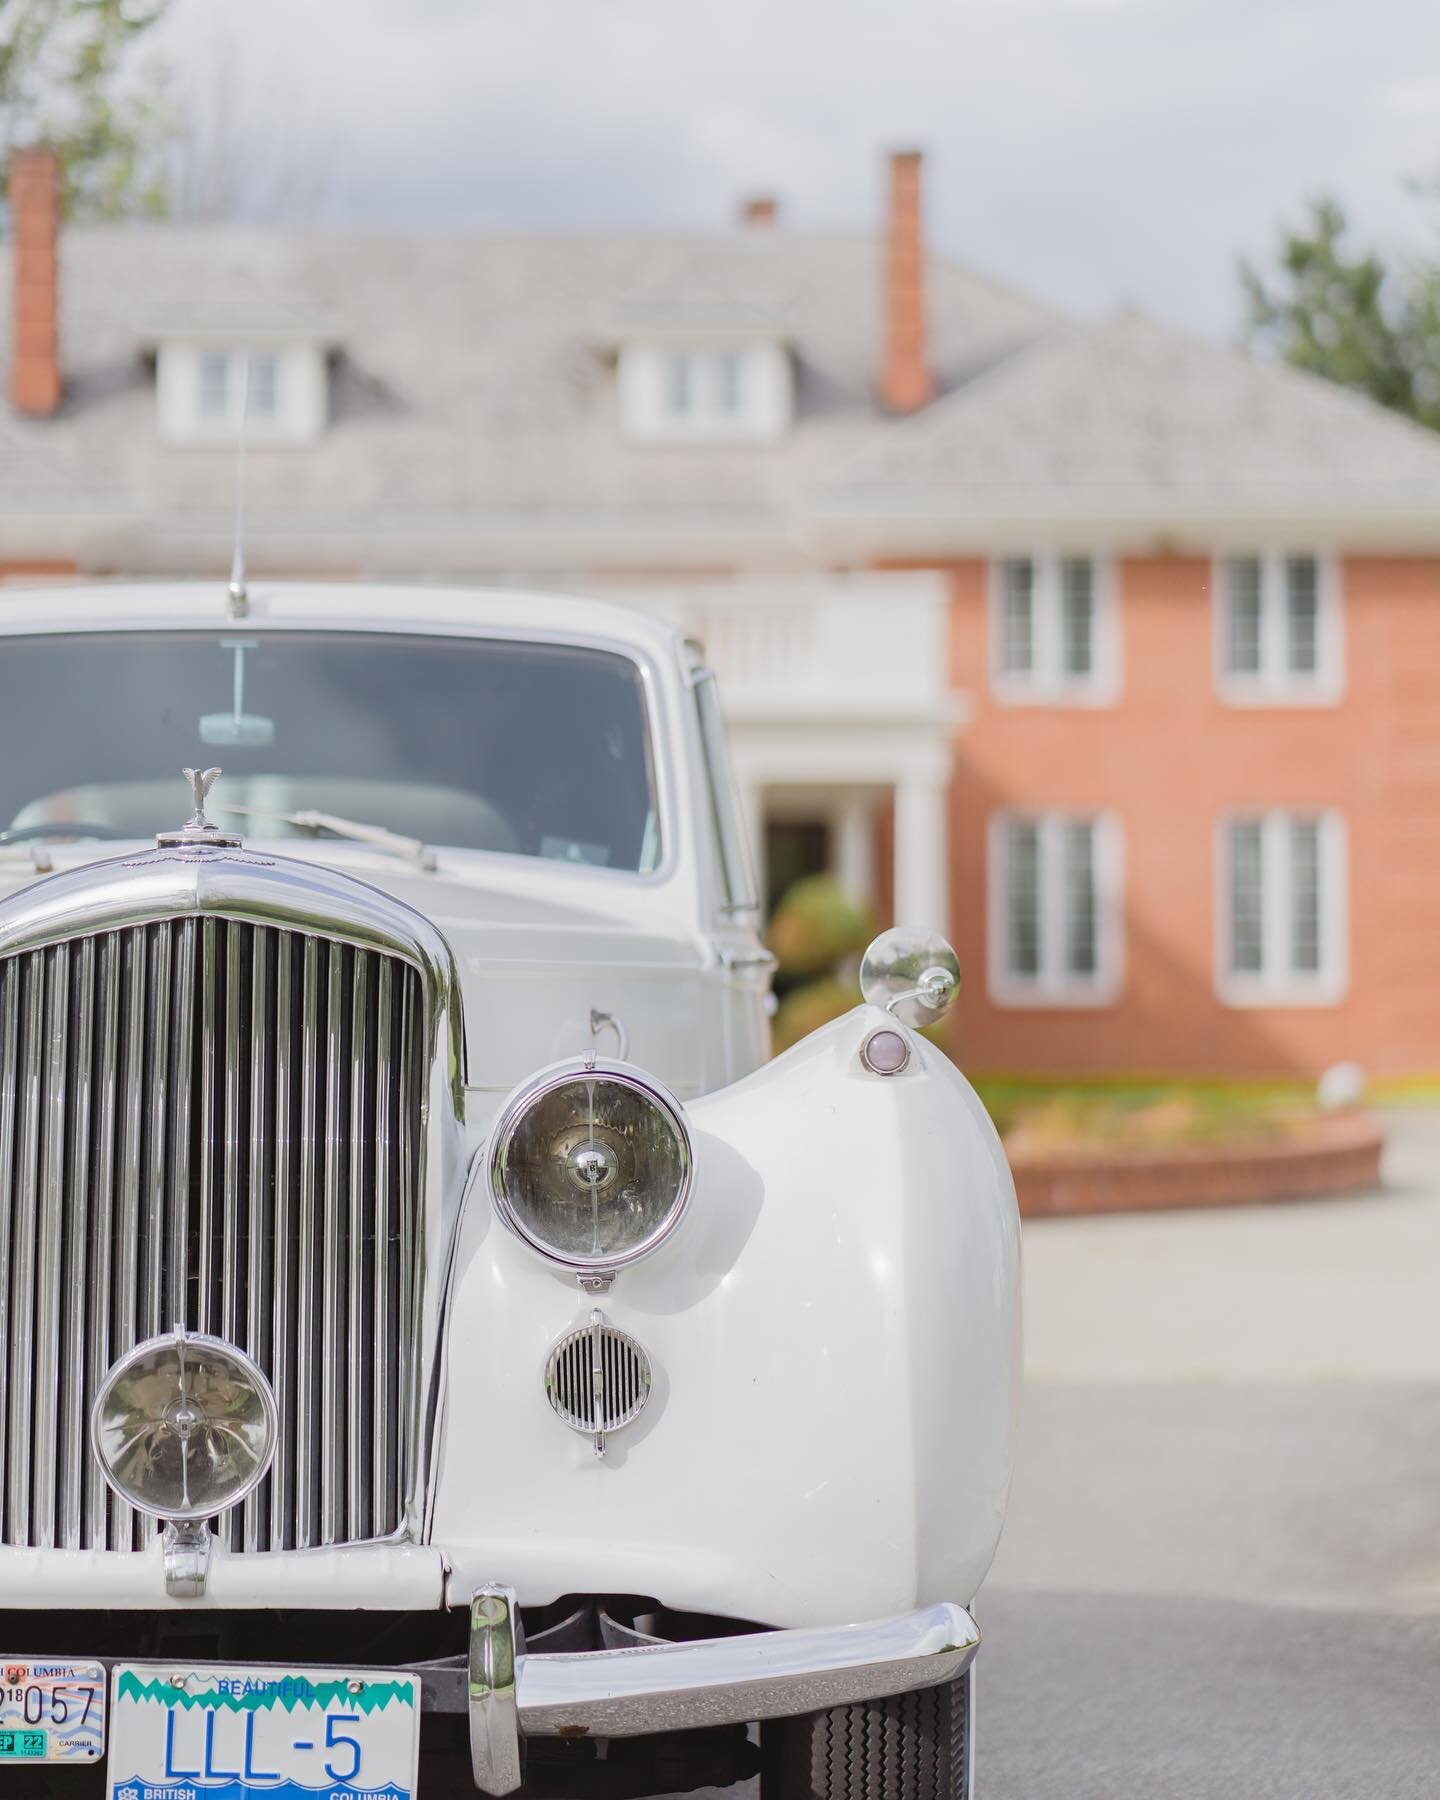 A classic car and an Edwardian manor go together like a fine wine and some good Brie.

We have limited dates available for 2022 and have now opened up bookings for 2023 ! Email us at events@silverridgeestate.com 

Makeup: @paig_ee 
Photographer: @chu